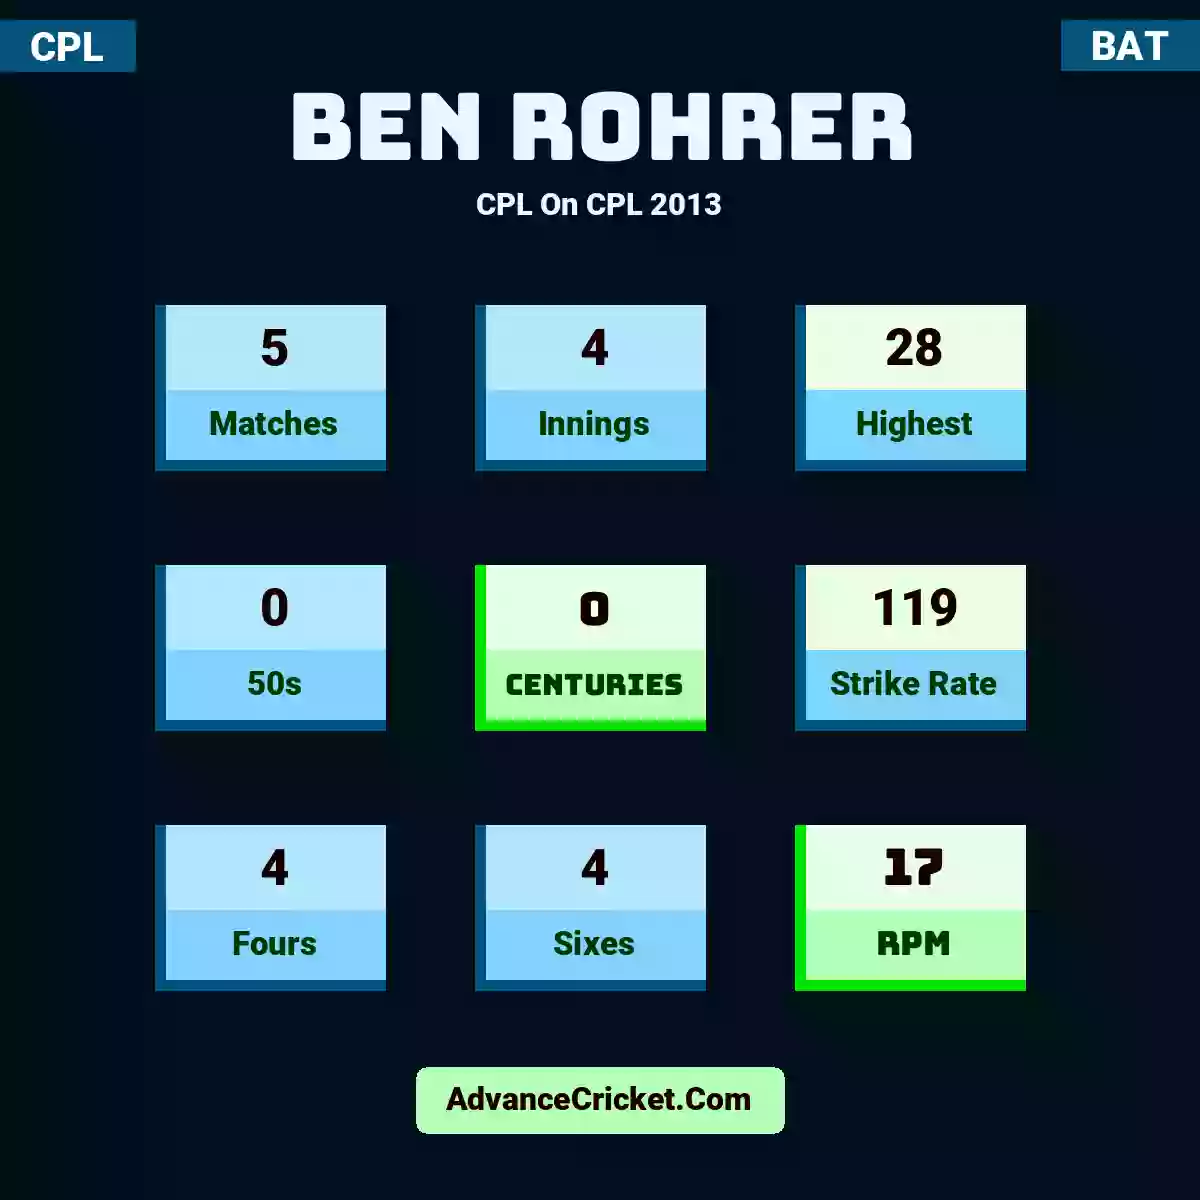 Ben Rohrer CPL  On CPL 2013, Ben Rohrer played 5 matches, scored 28 runs as highest, 0 half-centuries, and 0 centuries, with a strike rate of 119. B.Rohrer hit 4 fours and 4 sixes, with an RPM of 17.